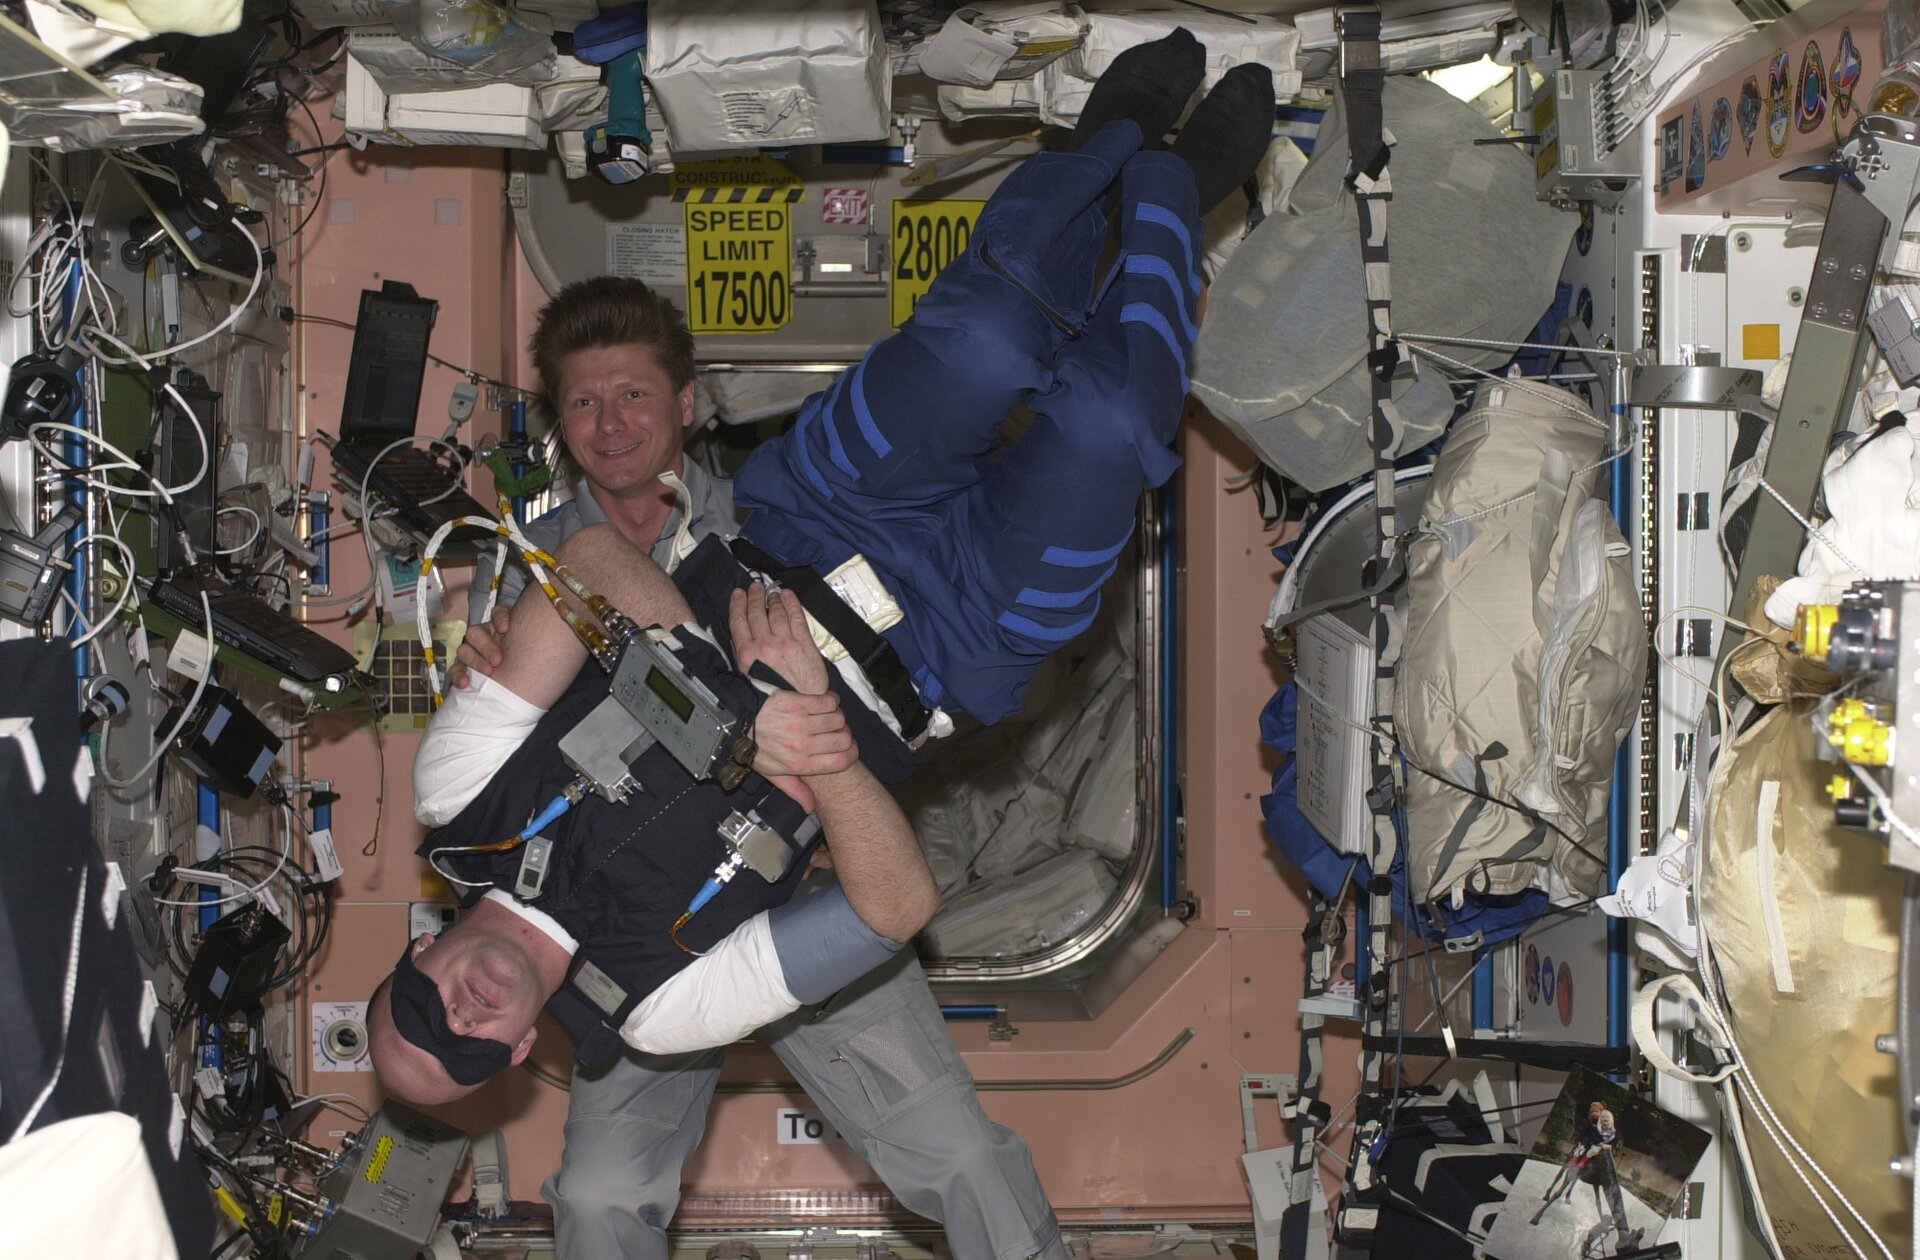 Kuipers conducting the SUIT experiment. He is assisted by his Russian colleague Gennadi Padalka